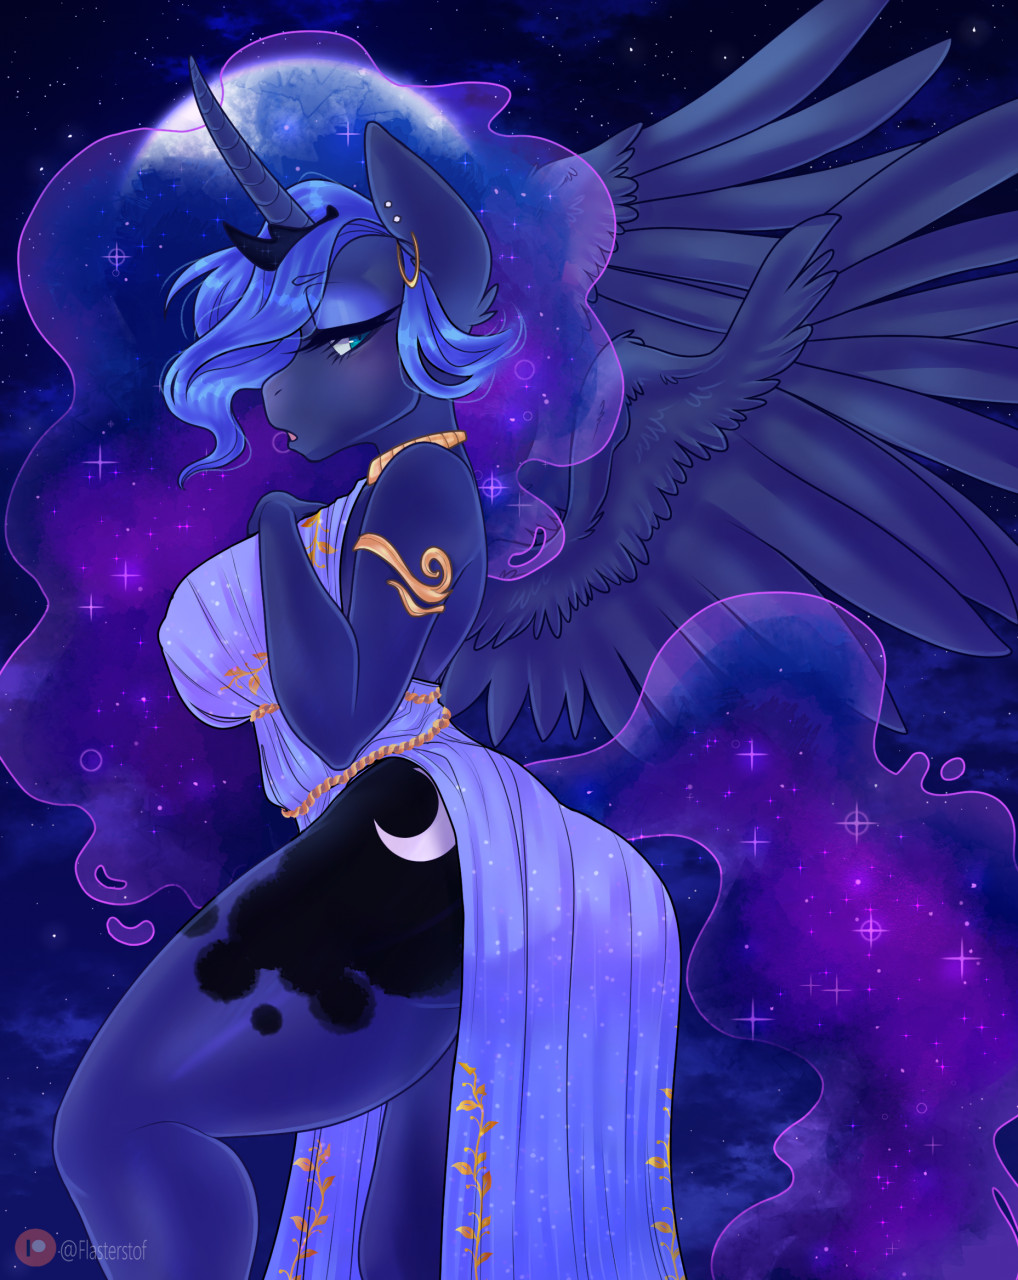 Princess Luna Pinup SFW by flasterstof -- Fur Affinity [dot] net